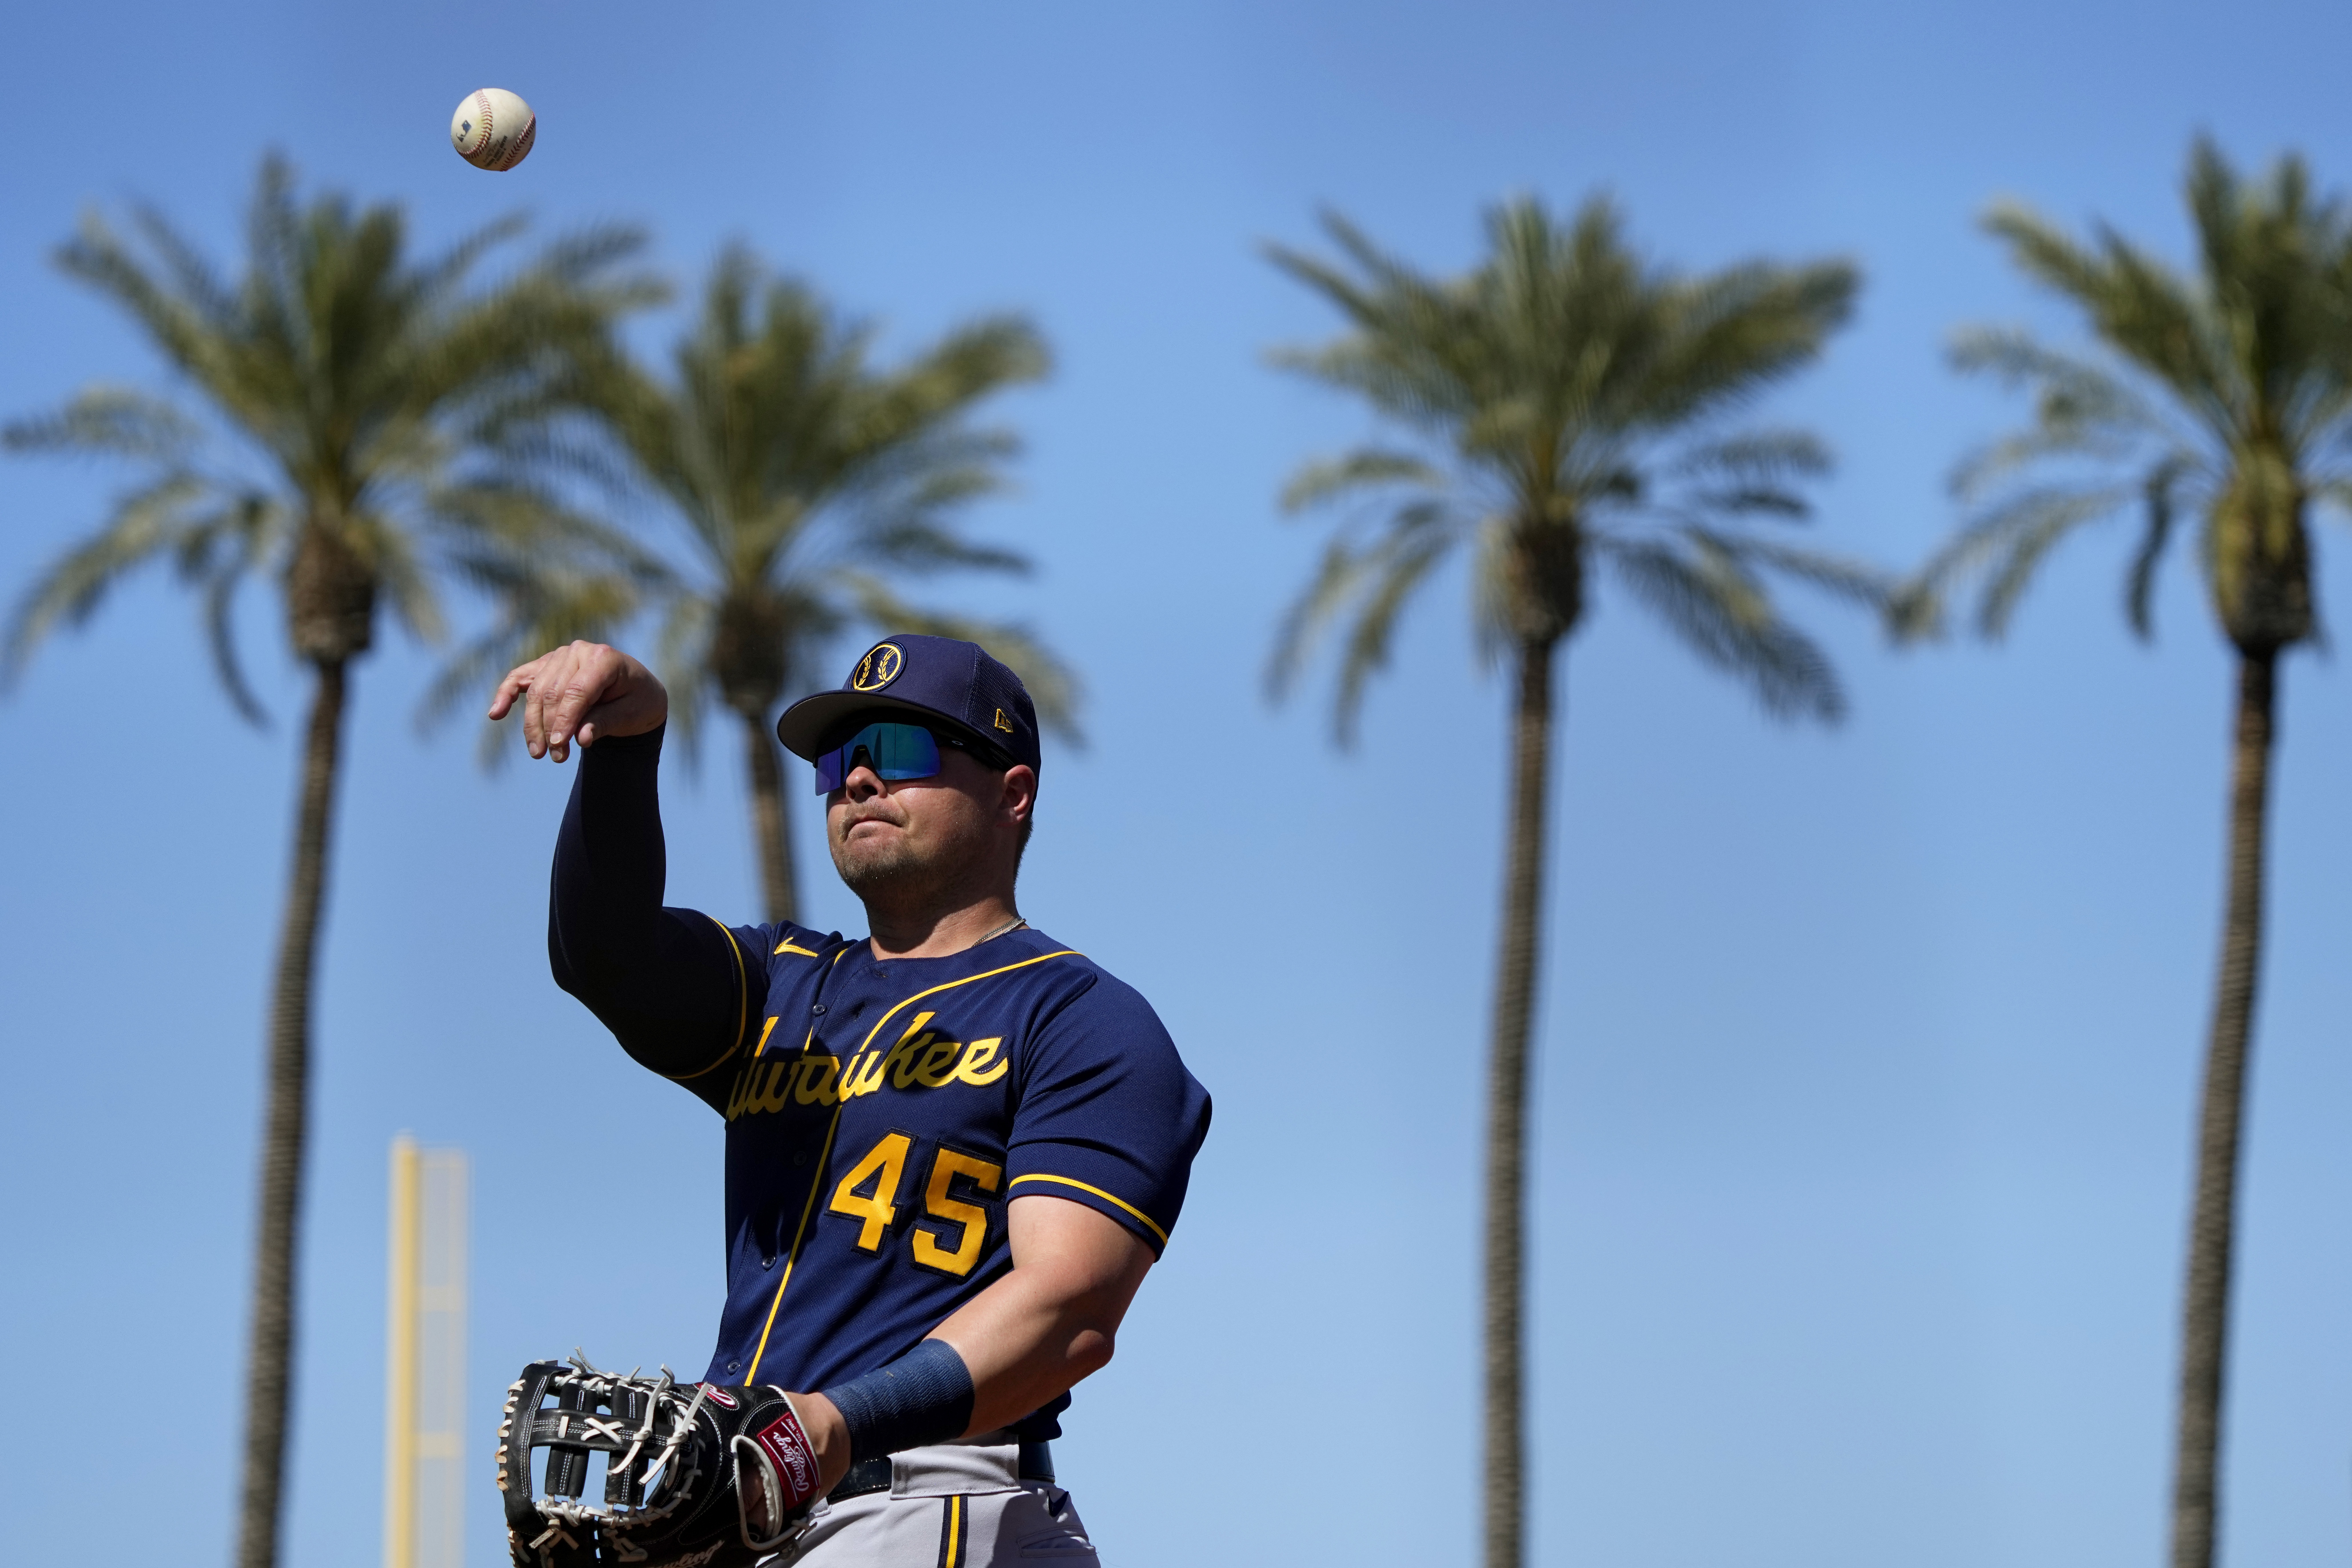 Brewers players prepped for Spring Training at high school